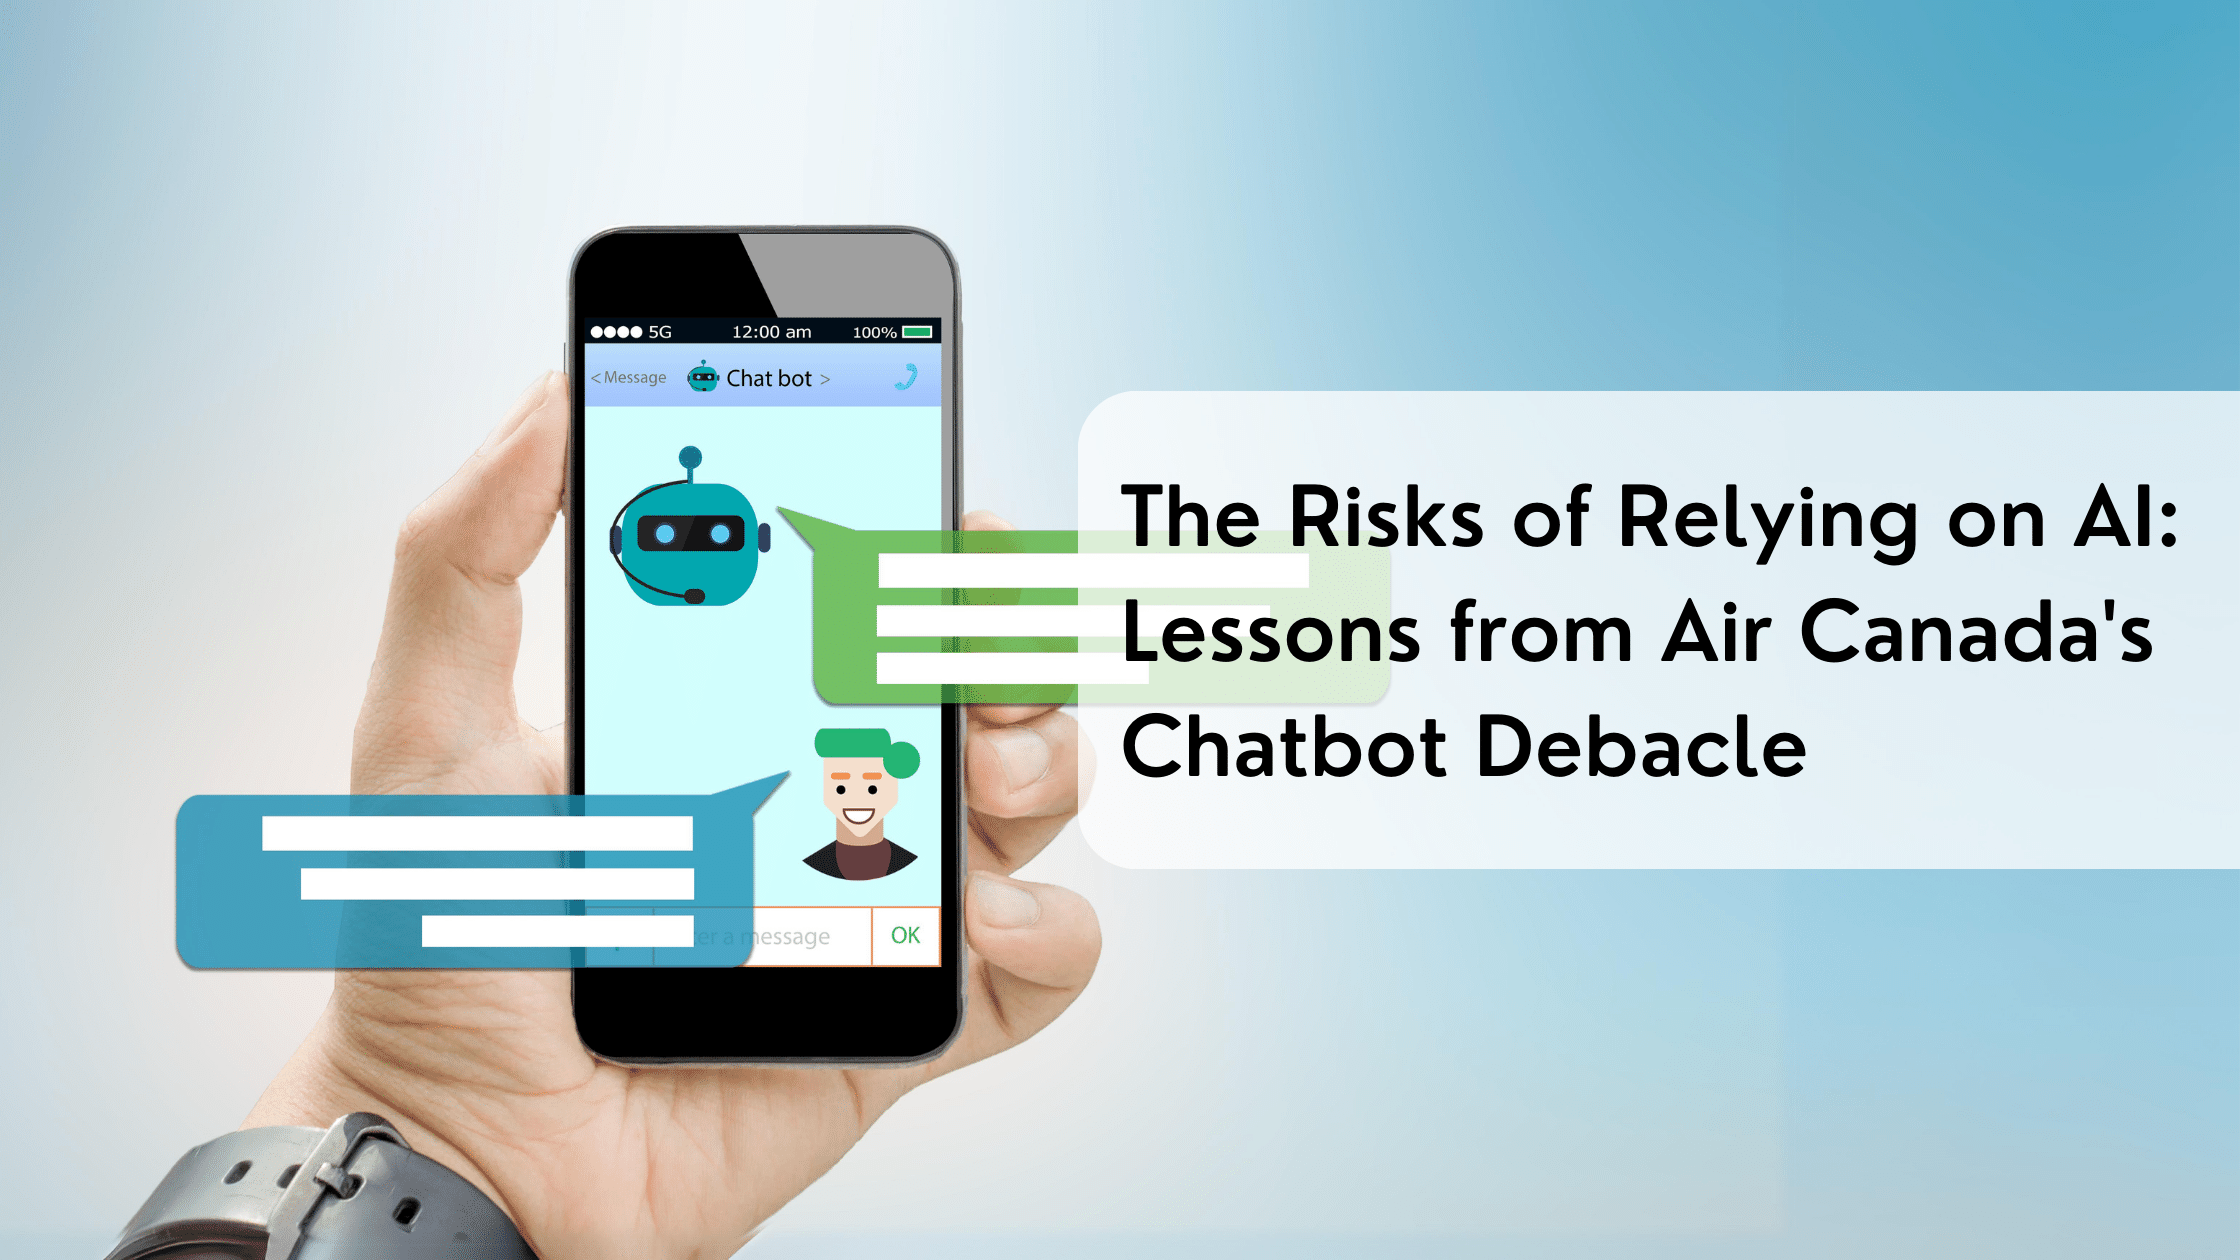 The Risks of Relying on AI: Lessons from Air Canada's Chatbot Debacle